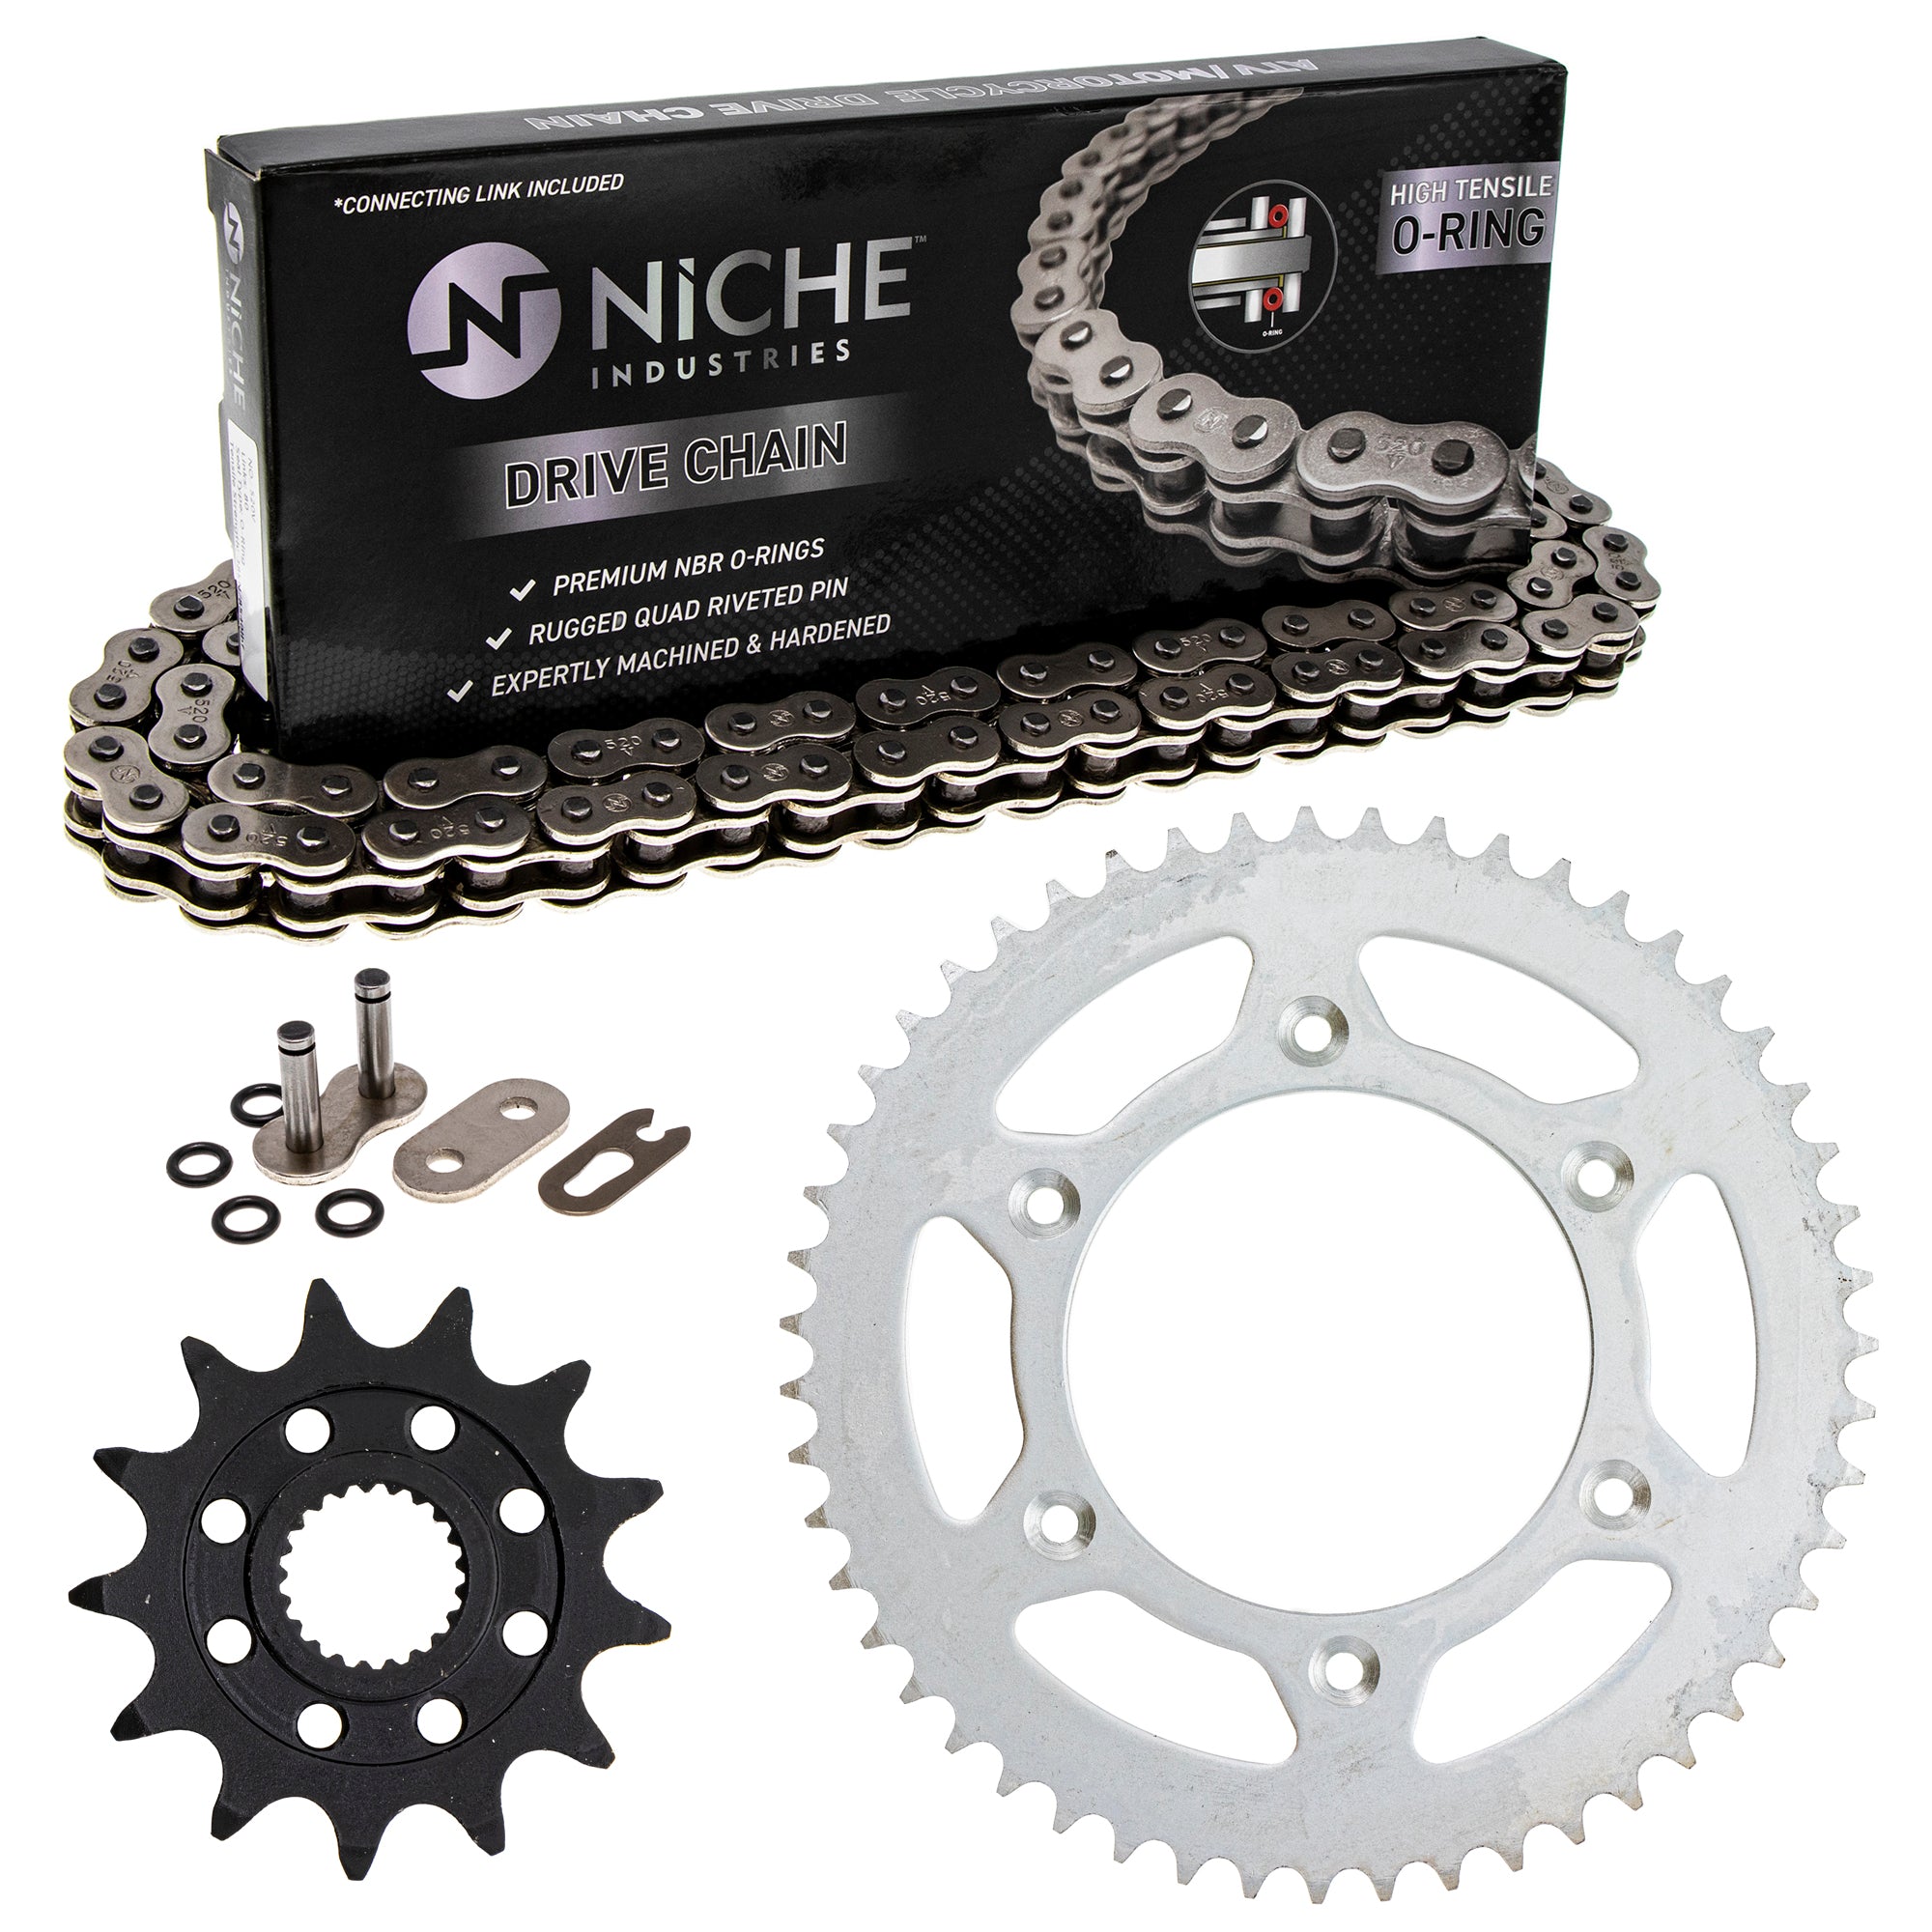 Drive Sprockets & Chain Kit for zOTHER JT Sprocket Honda CRF250R 41204-MKE-A10 NICHE MK1004145